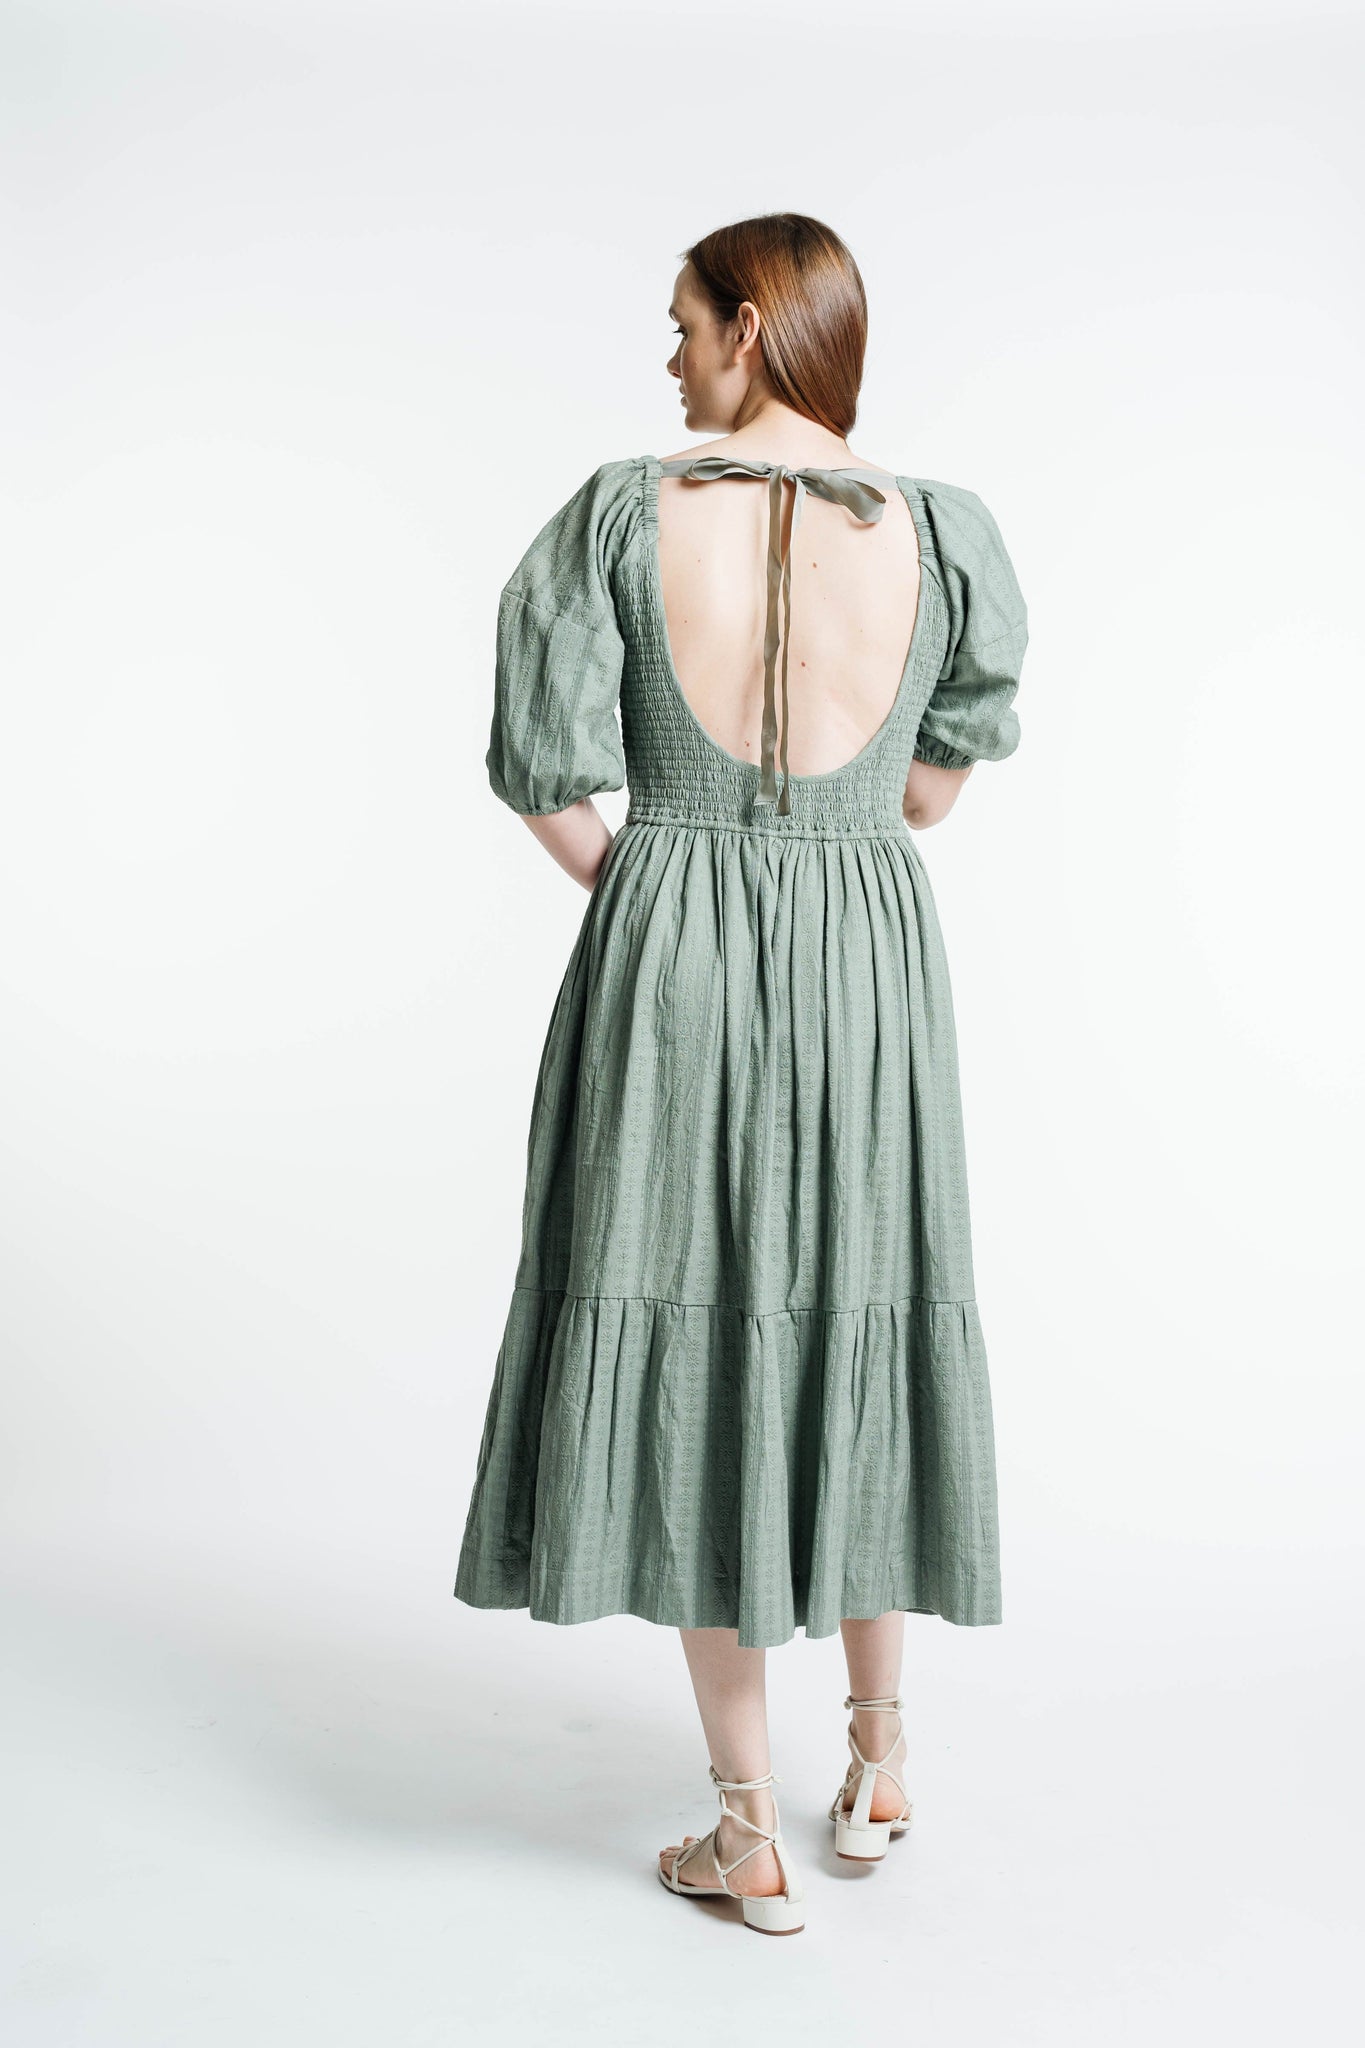 The back view of a woman wearing the Frida Midi Dress - Azure Broderie.